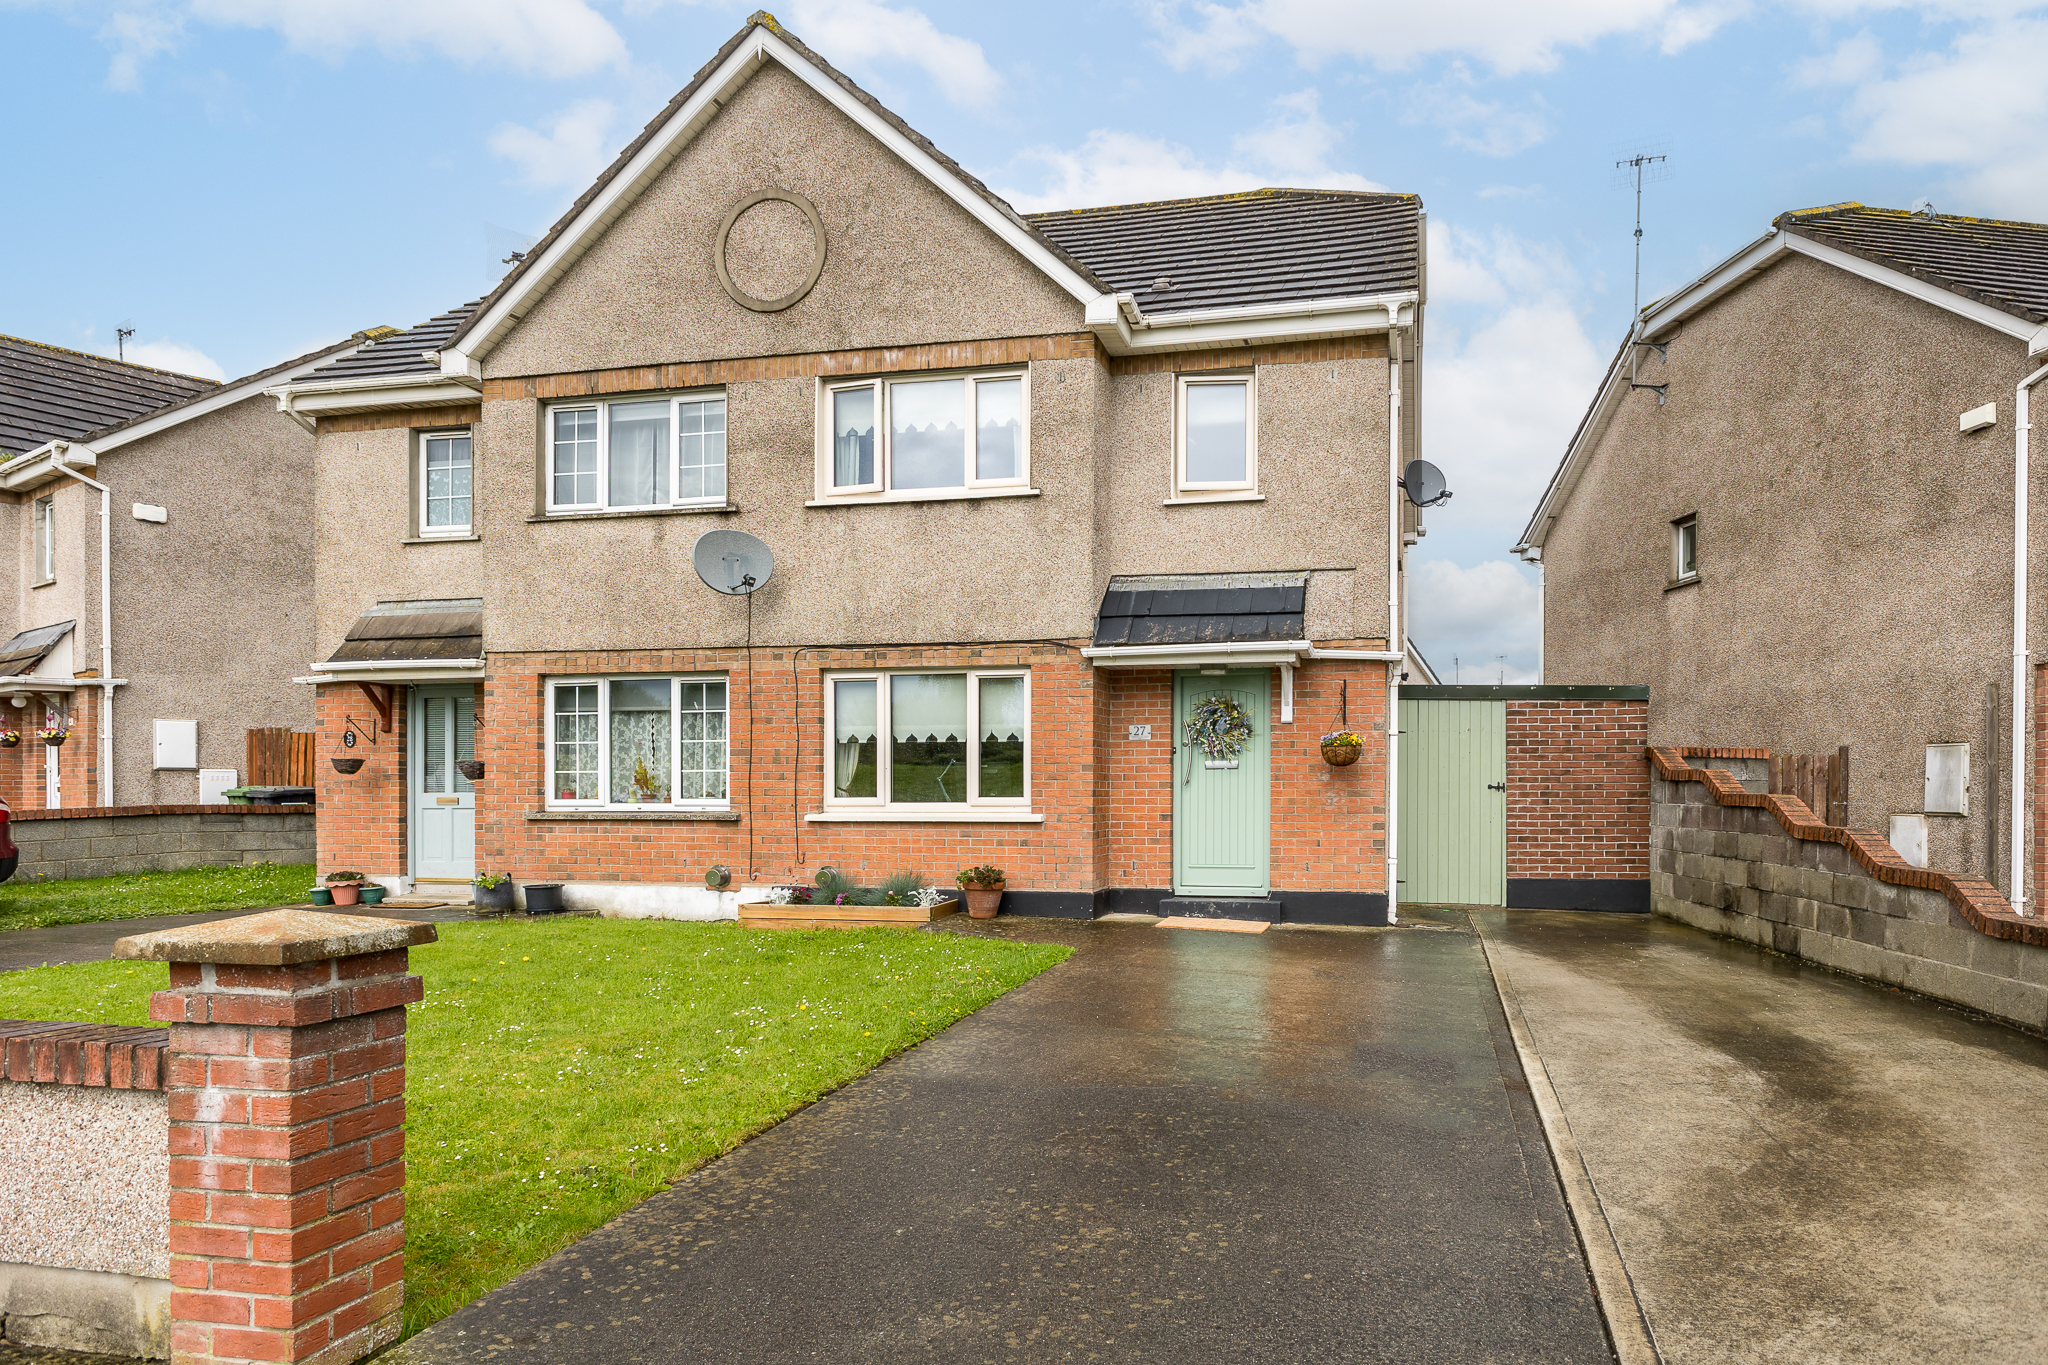 27 Cherrywood Drive Termonabbey Drogheda Co Louth